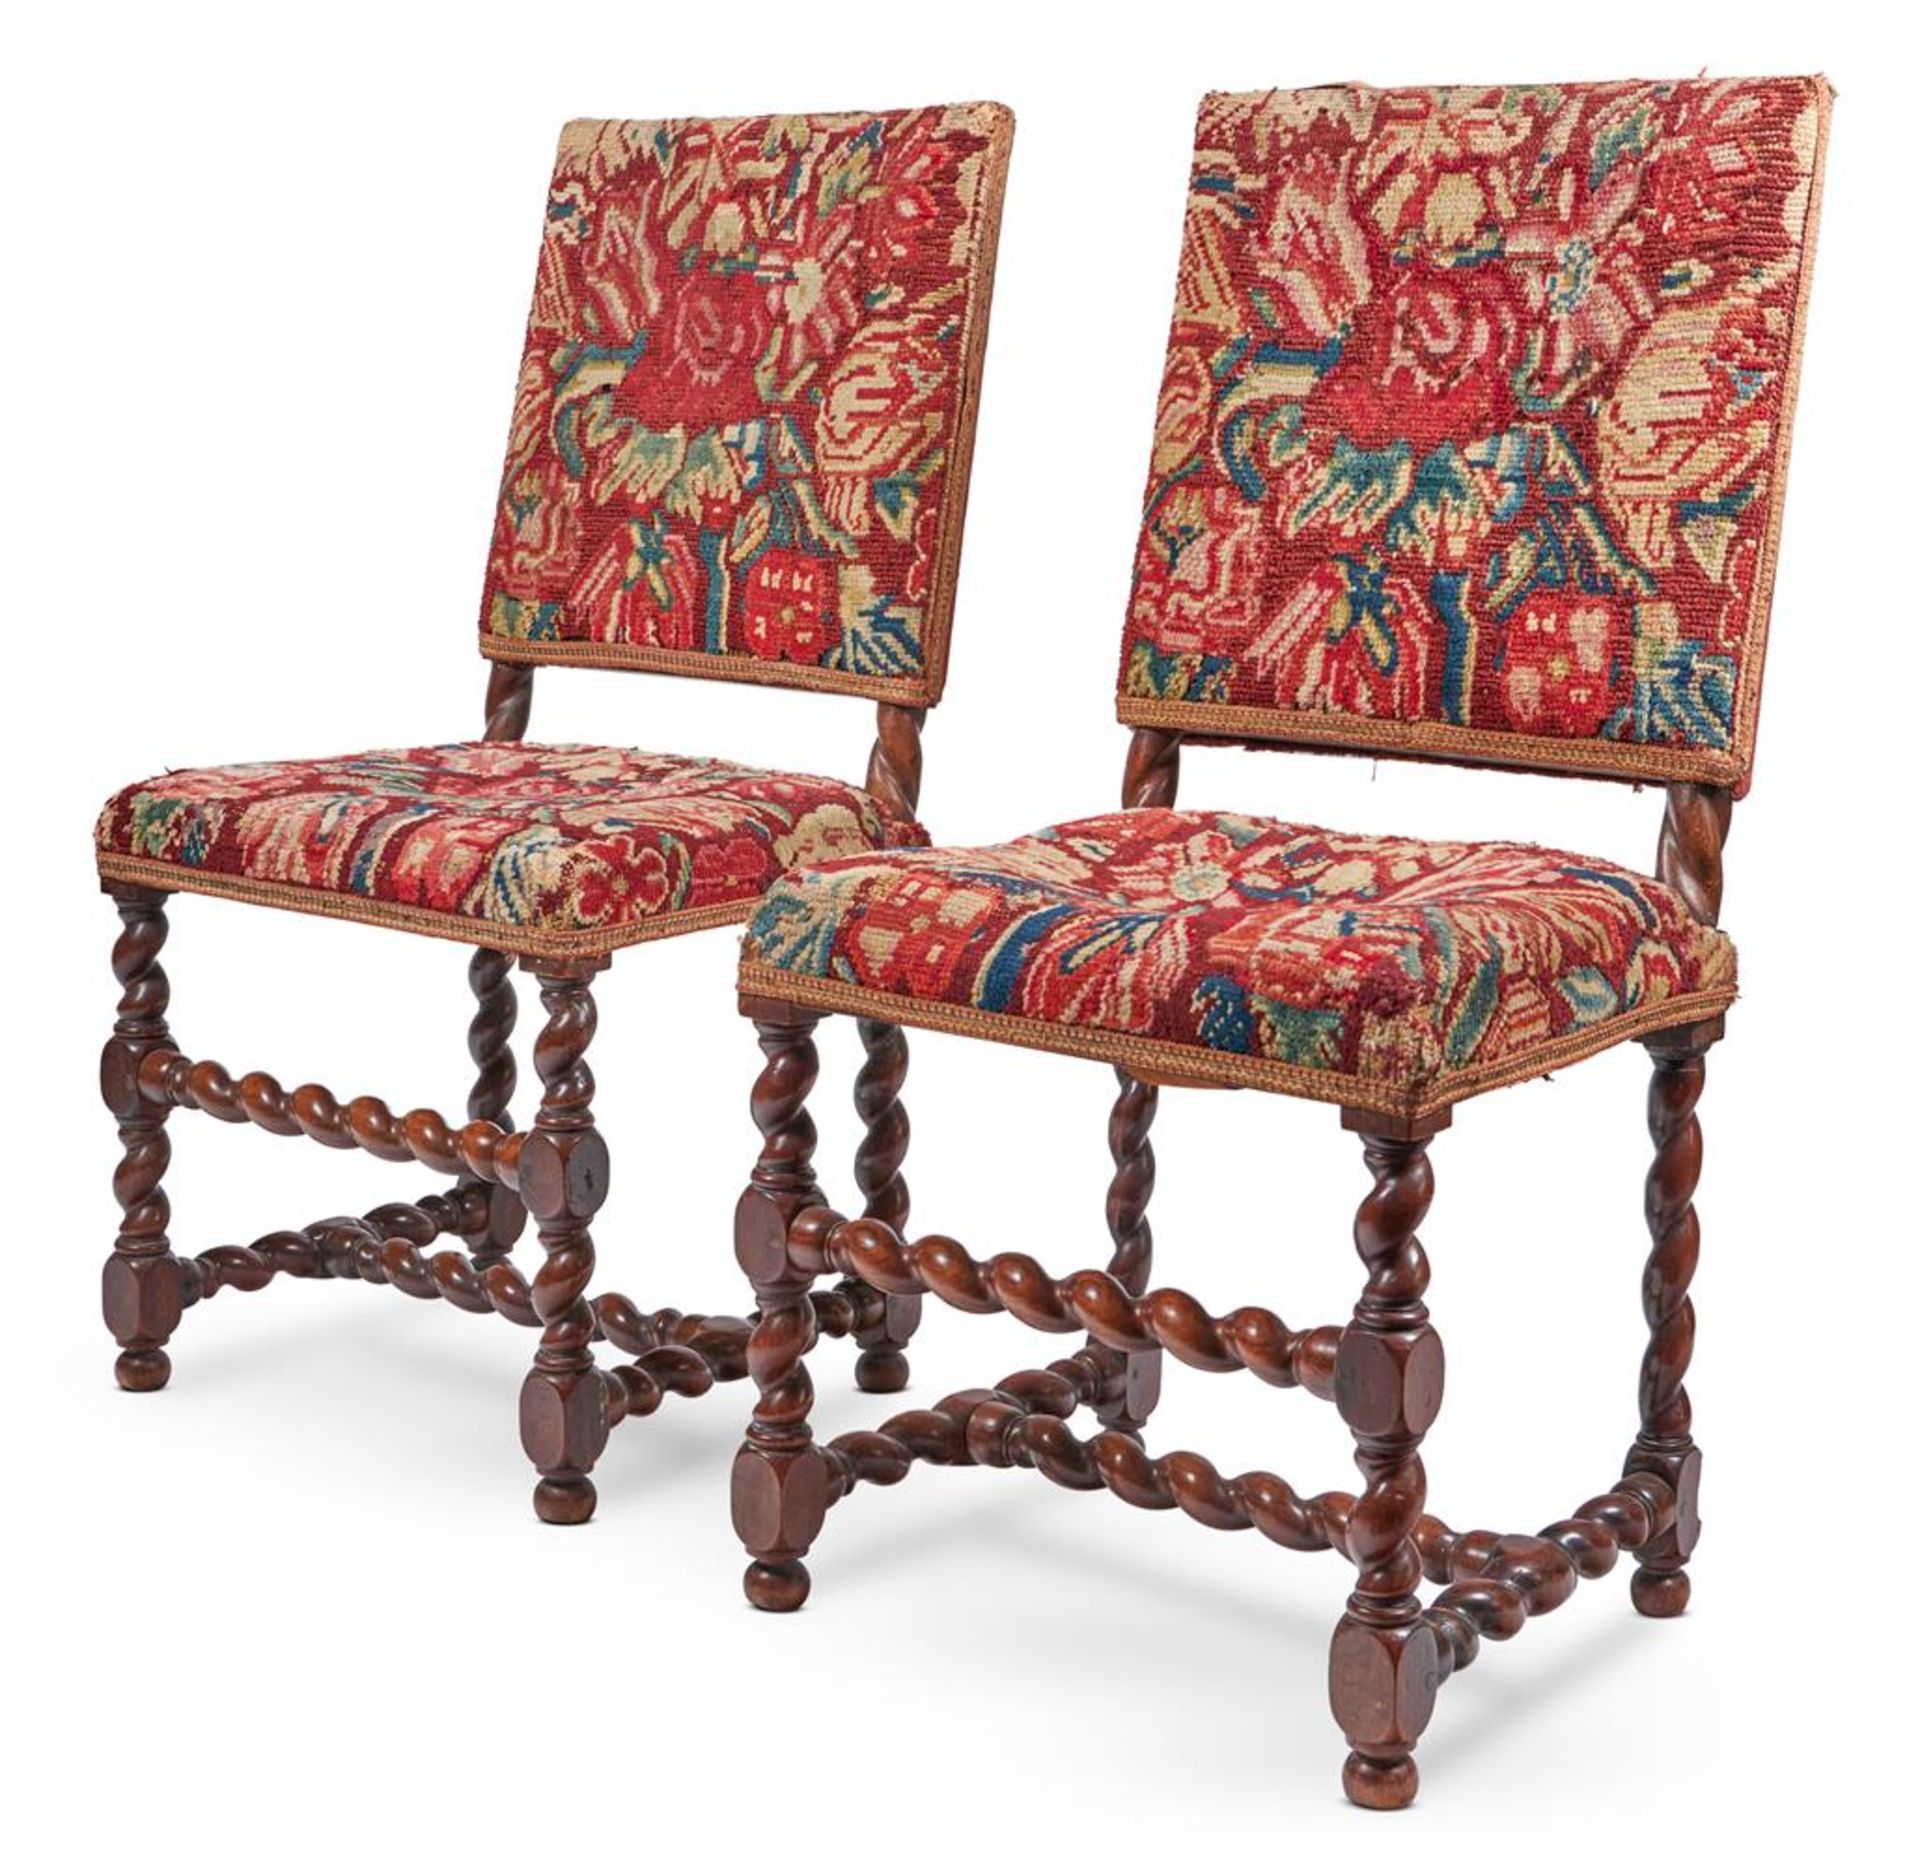 A PAIR OF WILLIAM & MARY WALNUT AND TURKEY-WORK SIDE CHAIRS OR BACKSTOOLS, LATE 17TH CENTURY